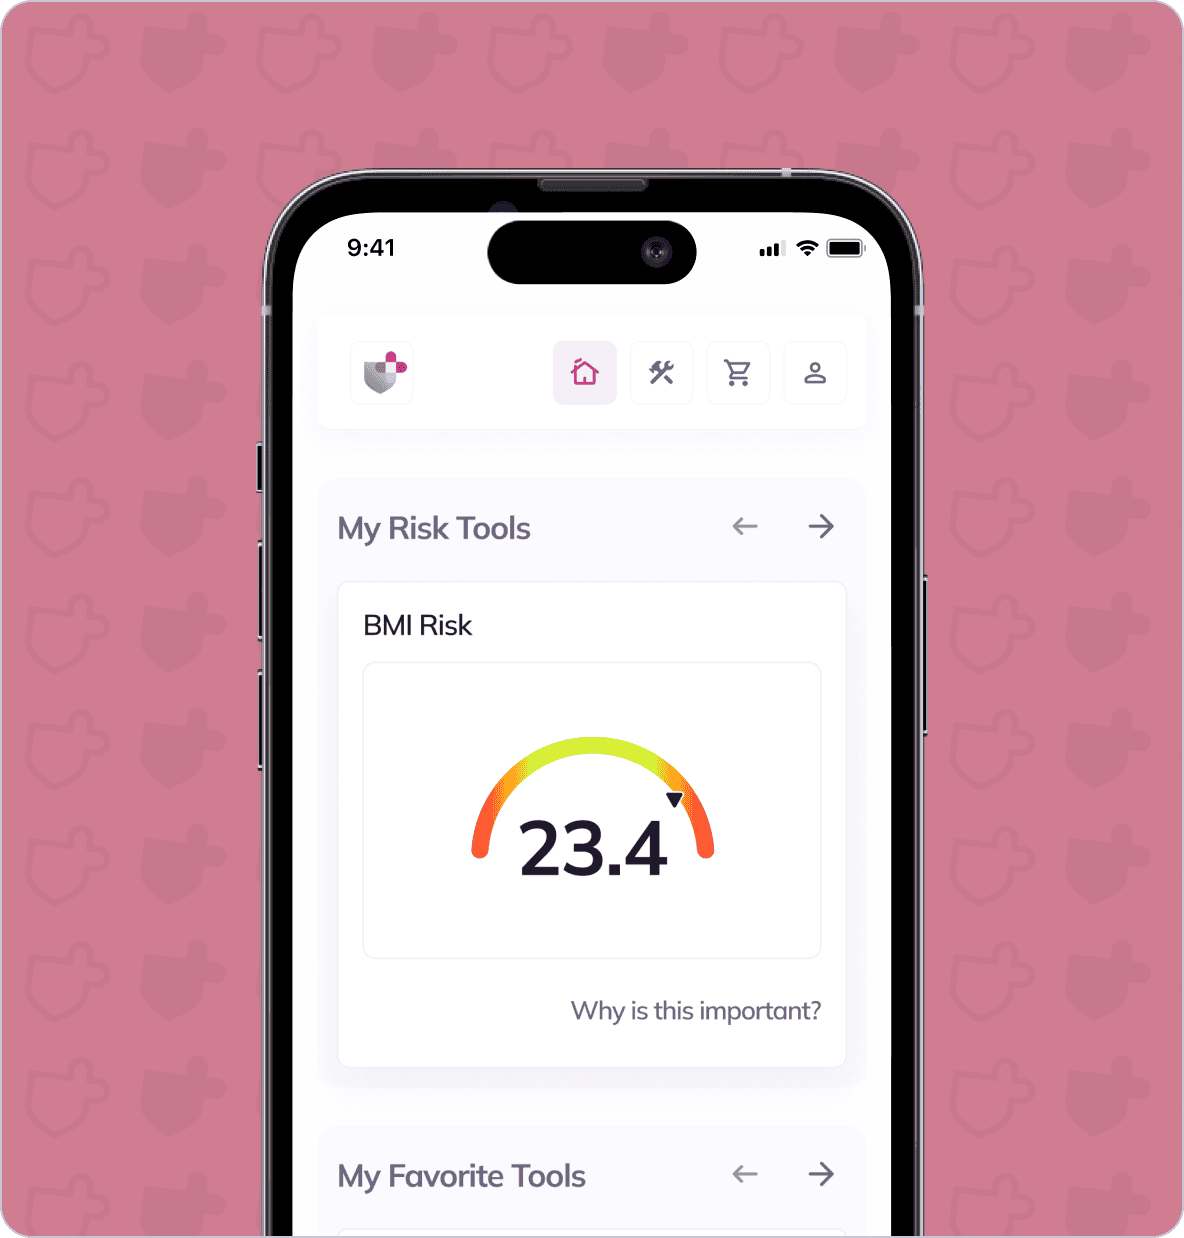 A smartphone screen displaying a health app showing a BMI risk meter with a reading of 23.4. The background is pink with shield icons.